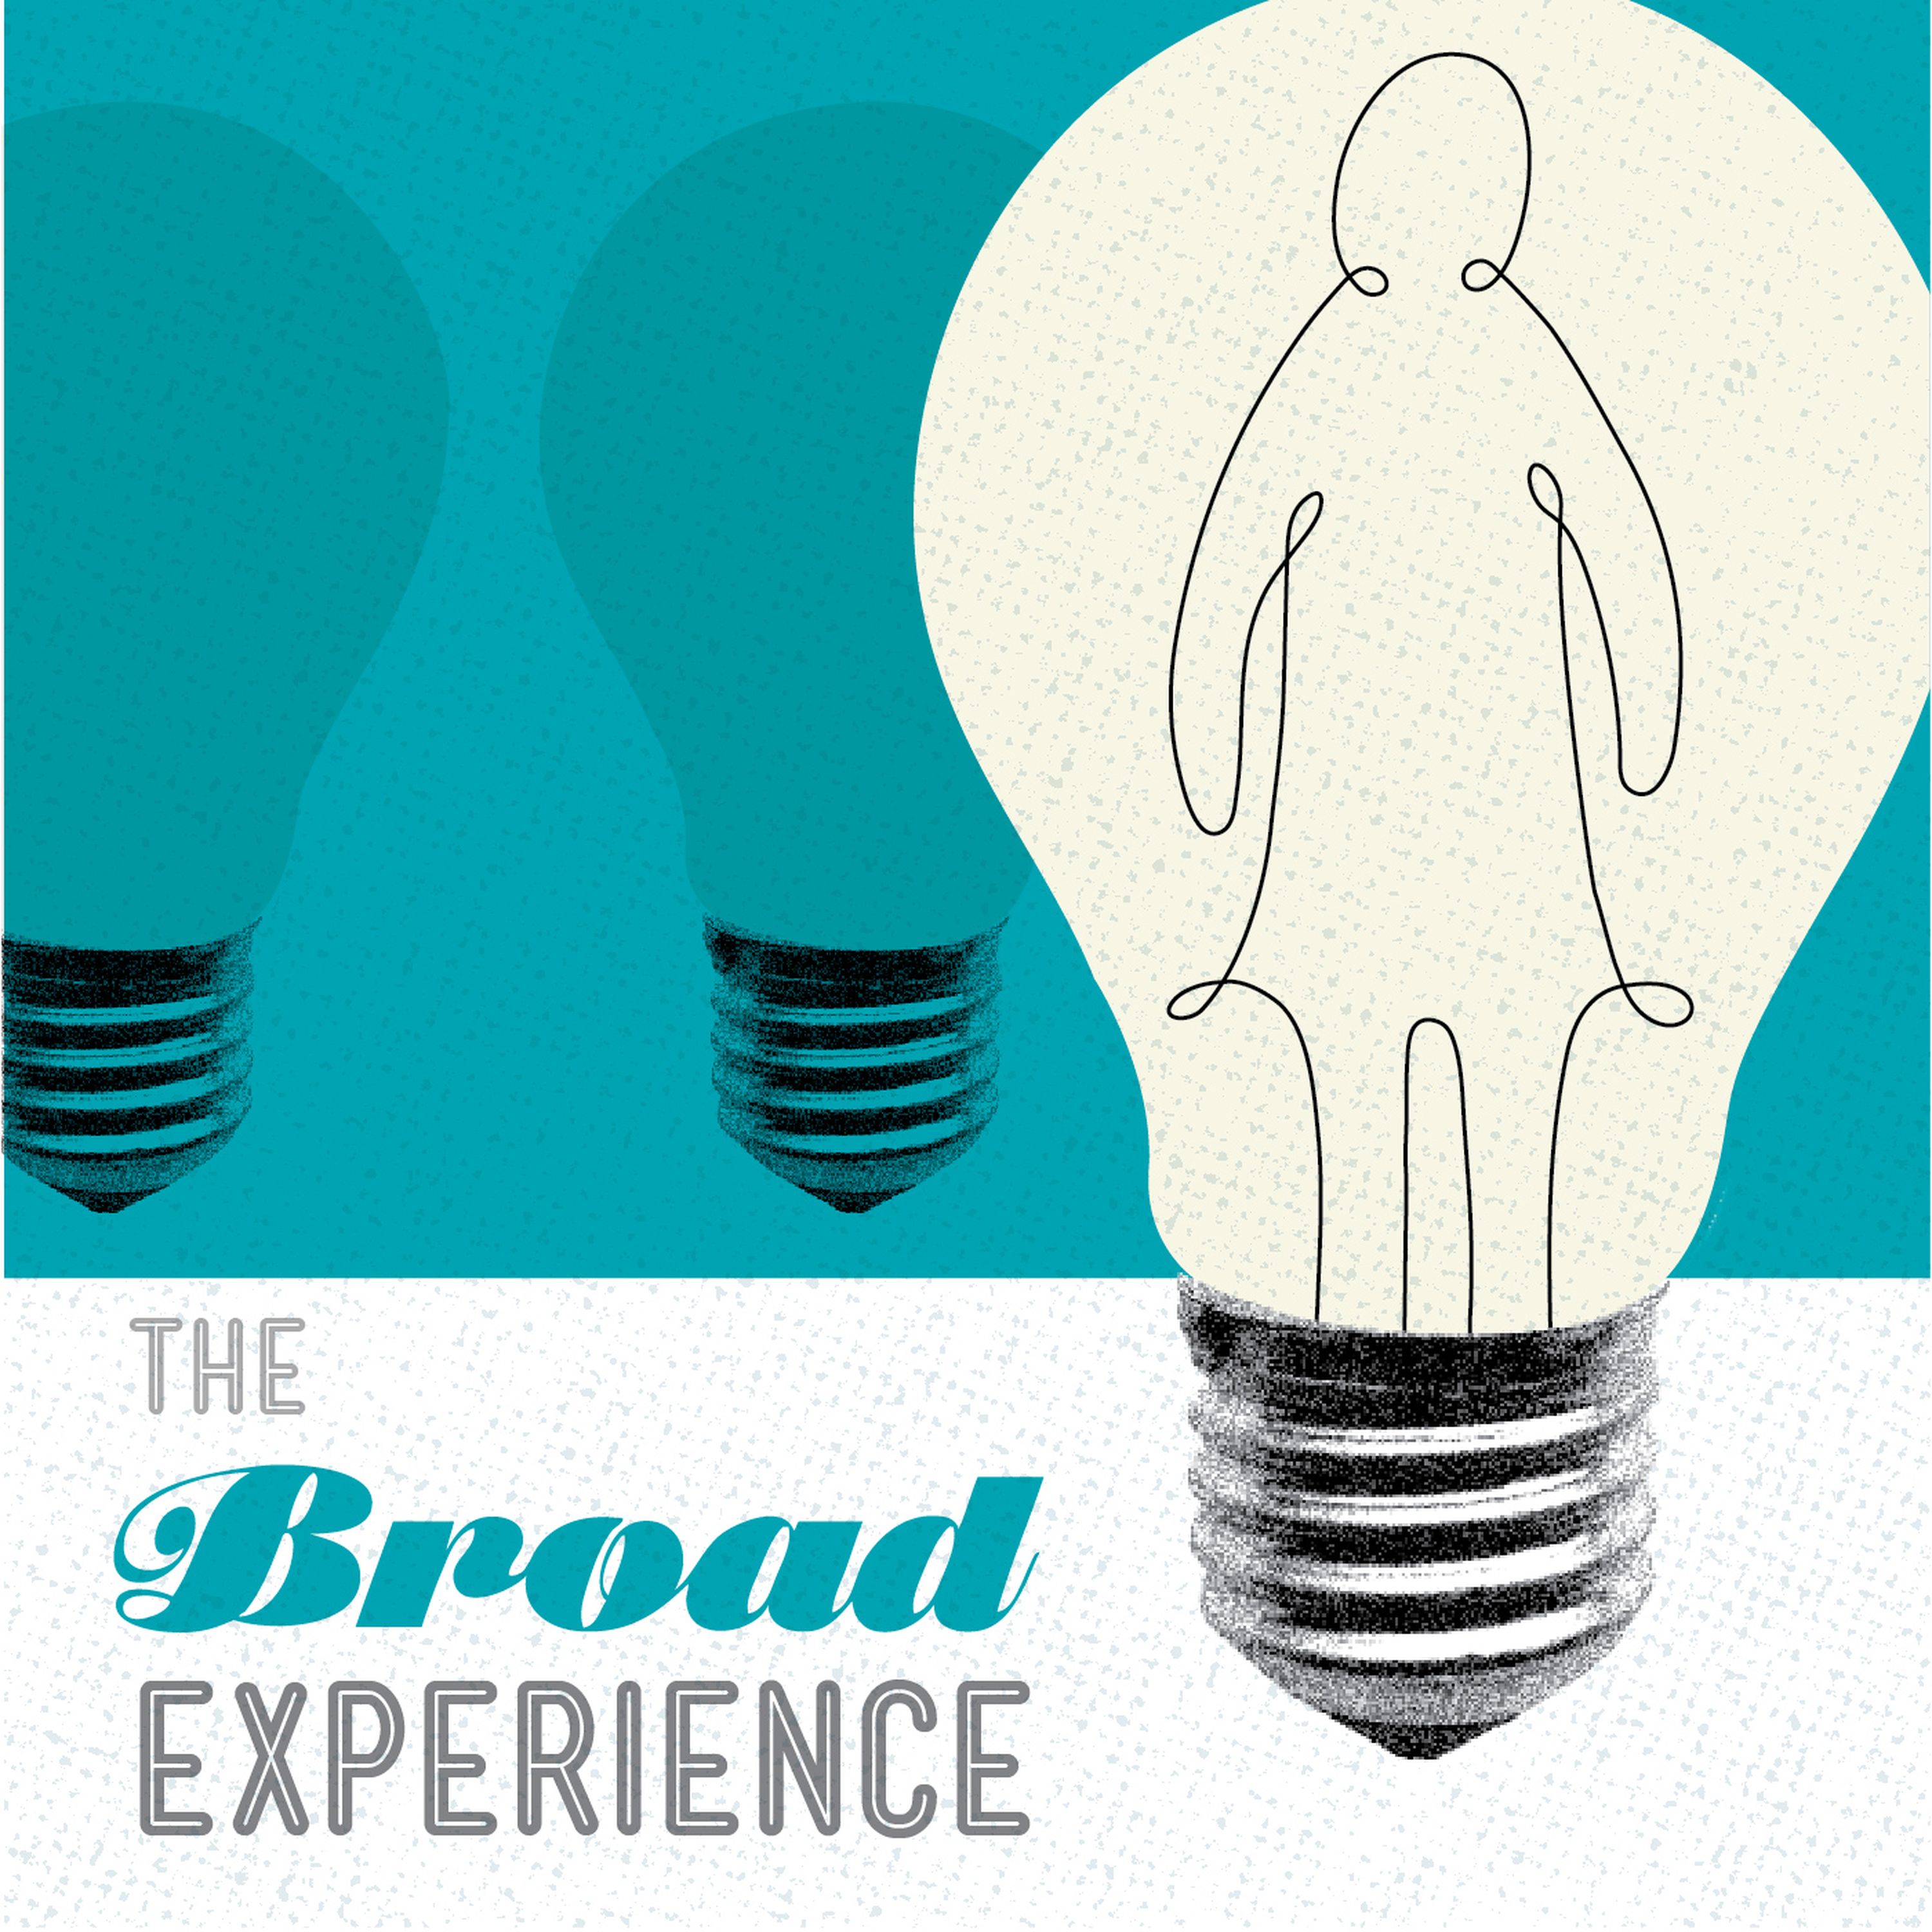 The Broad Experience 41: Stop fixing women, start fixing companies